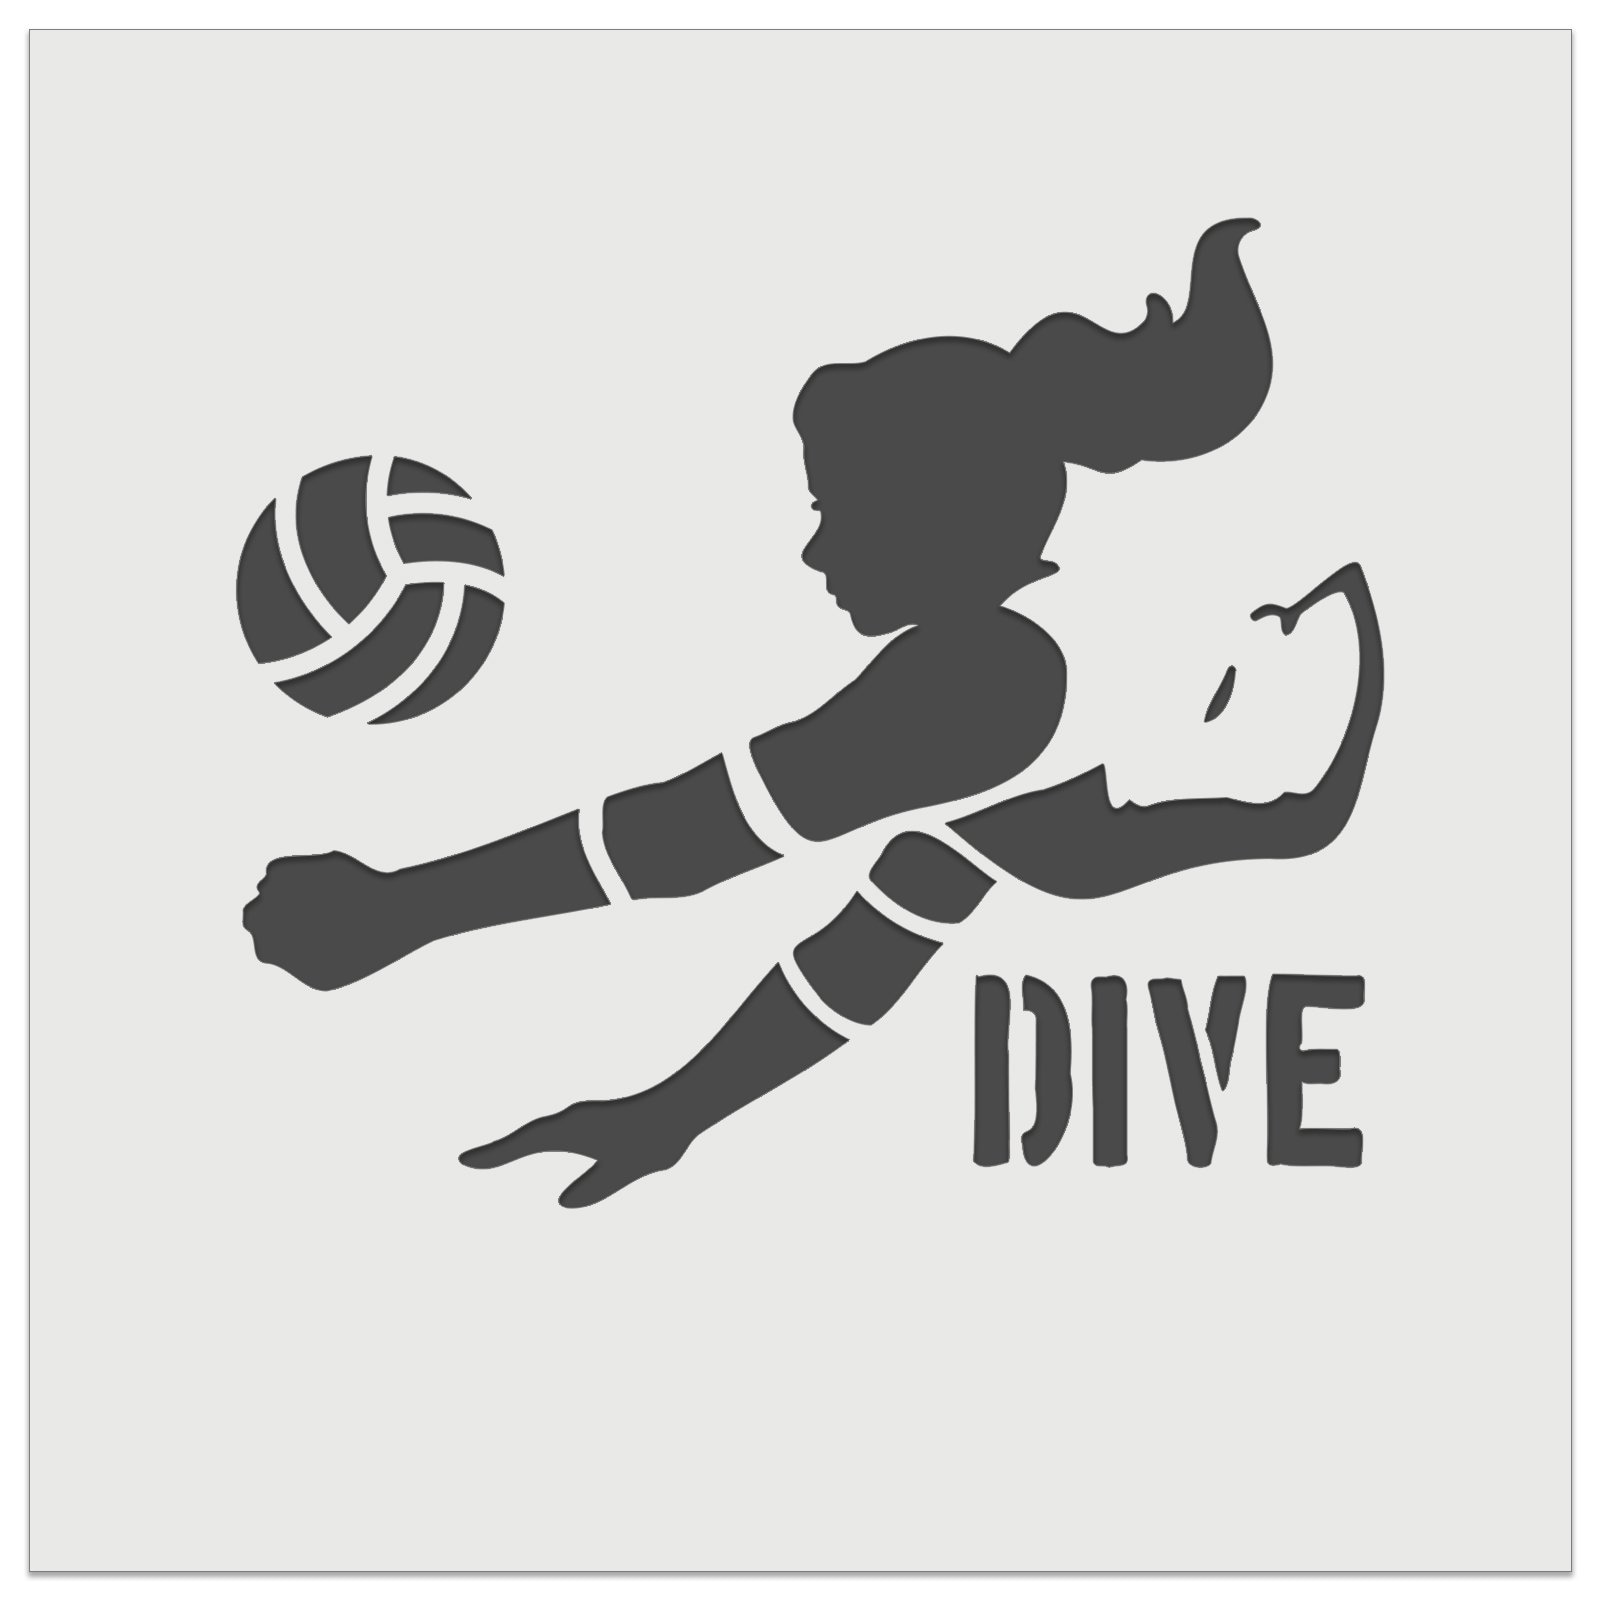  Soccer Stencil, 4.5 x 6 inch (S) - Decorative Football Player  Sport Wall Stencils for Painting Template : Arts, Crafts & Sewing